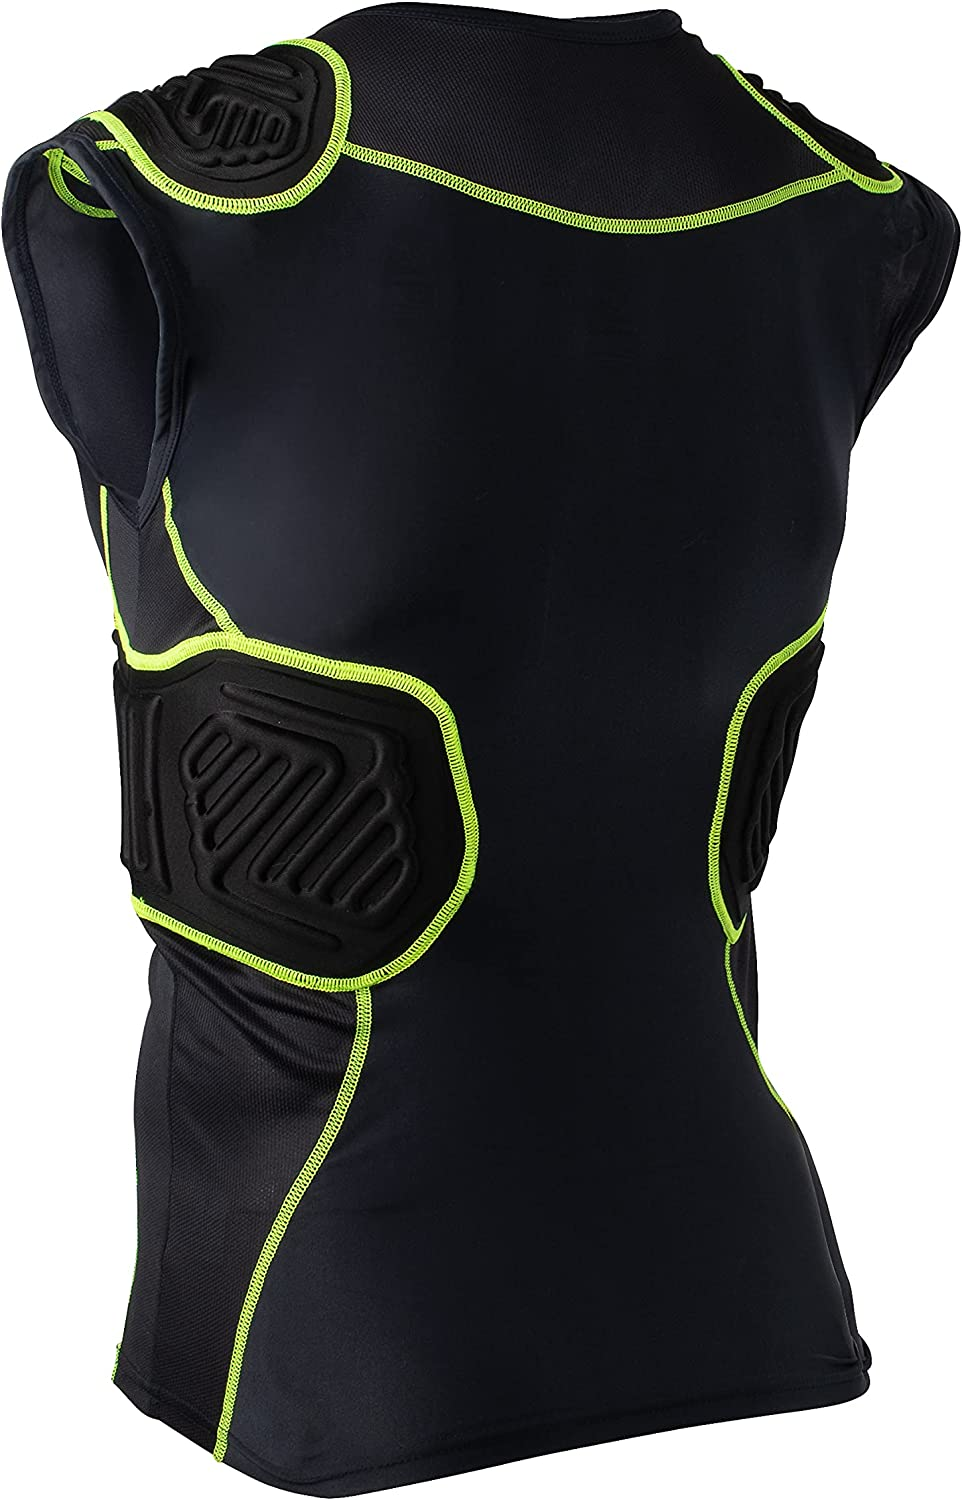 When selecting mountain bike body armor choose a vest like this that won’t restrict movement.